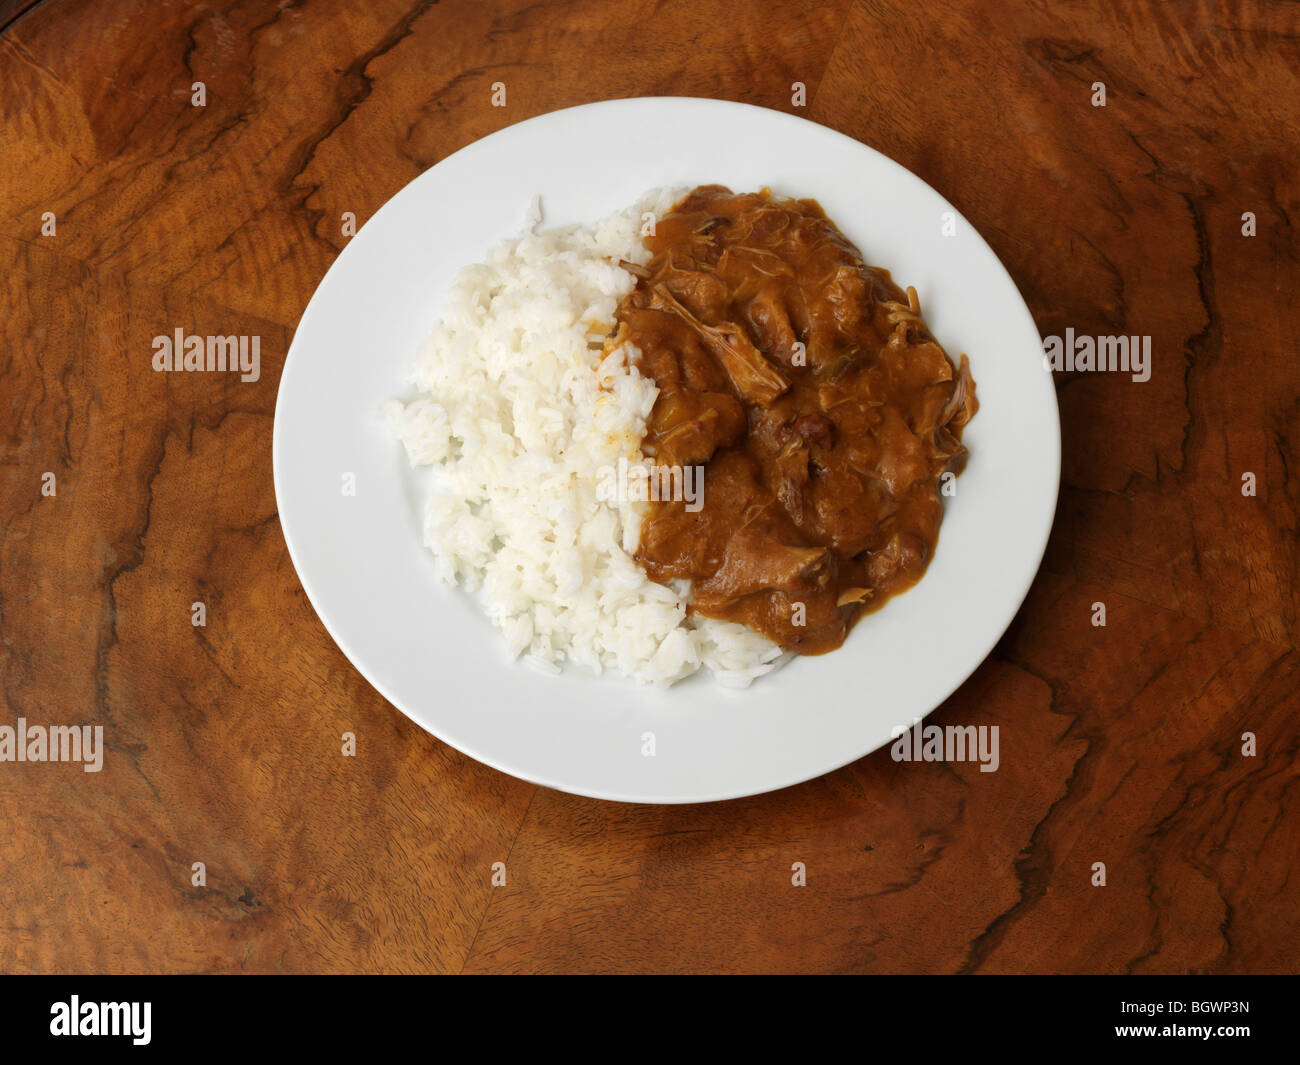 Plate of Curry and Rice Stock Photo